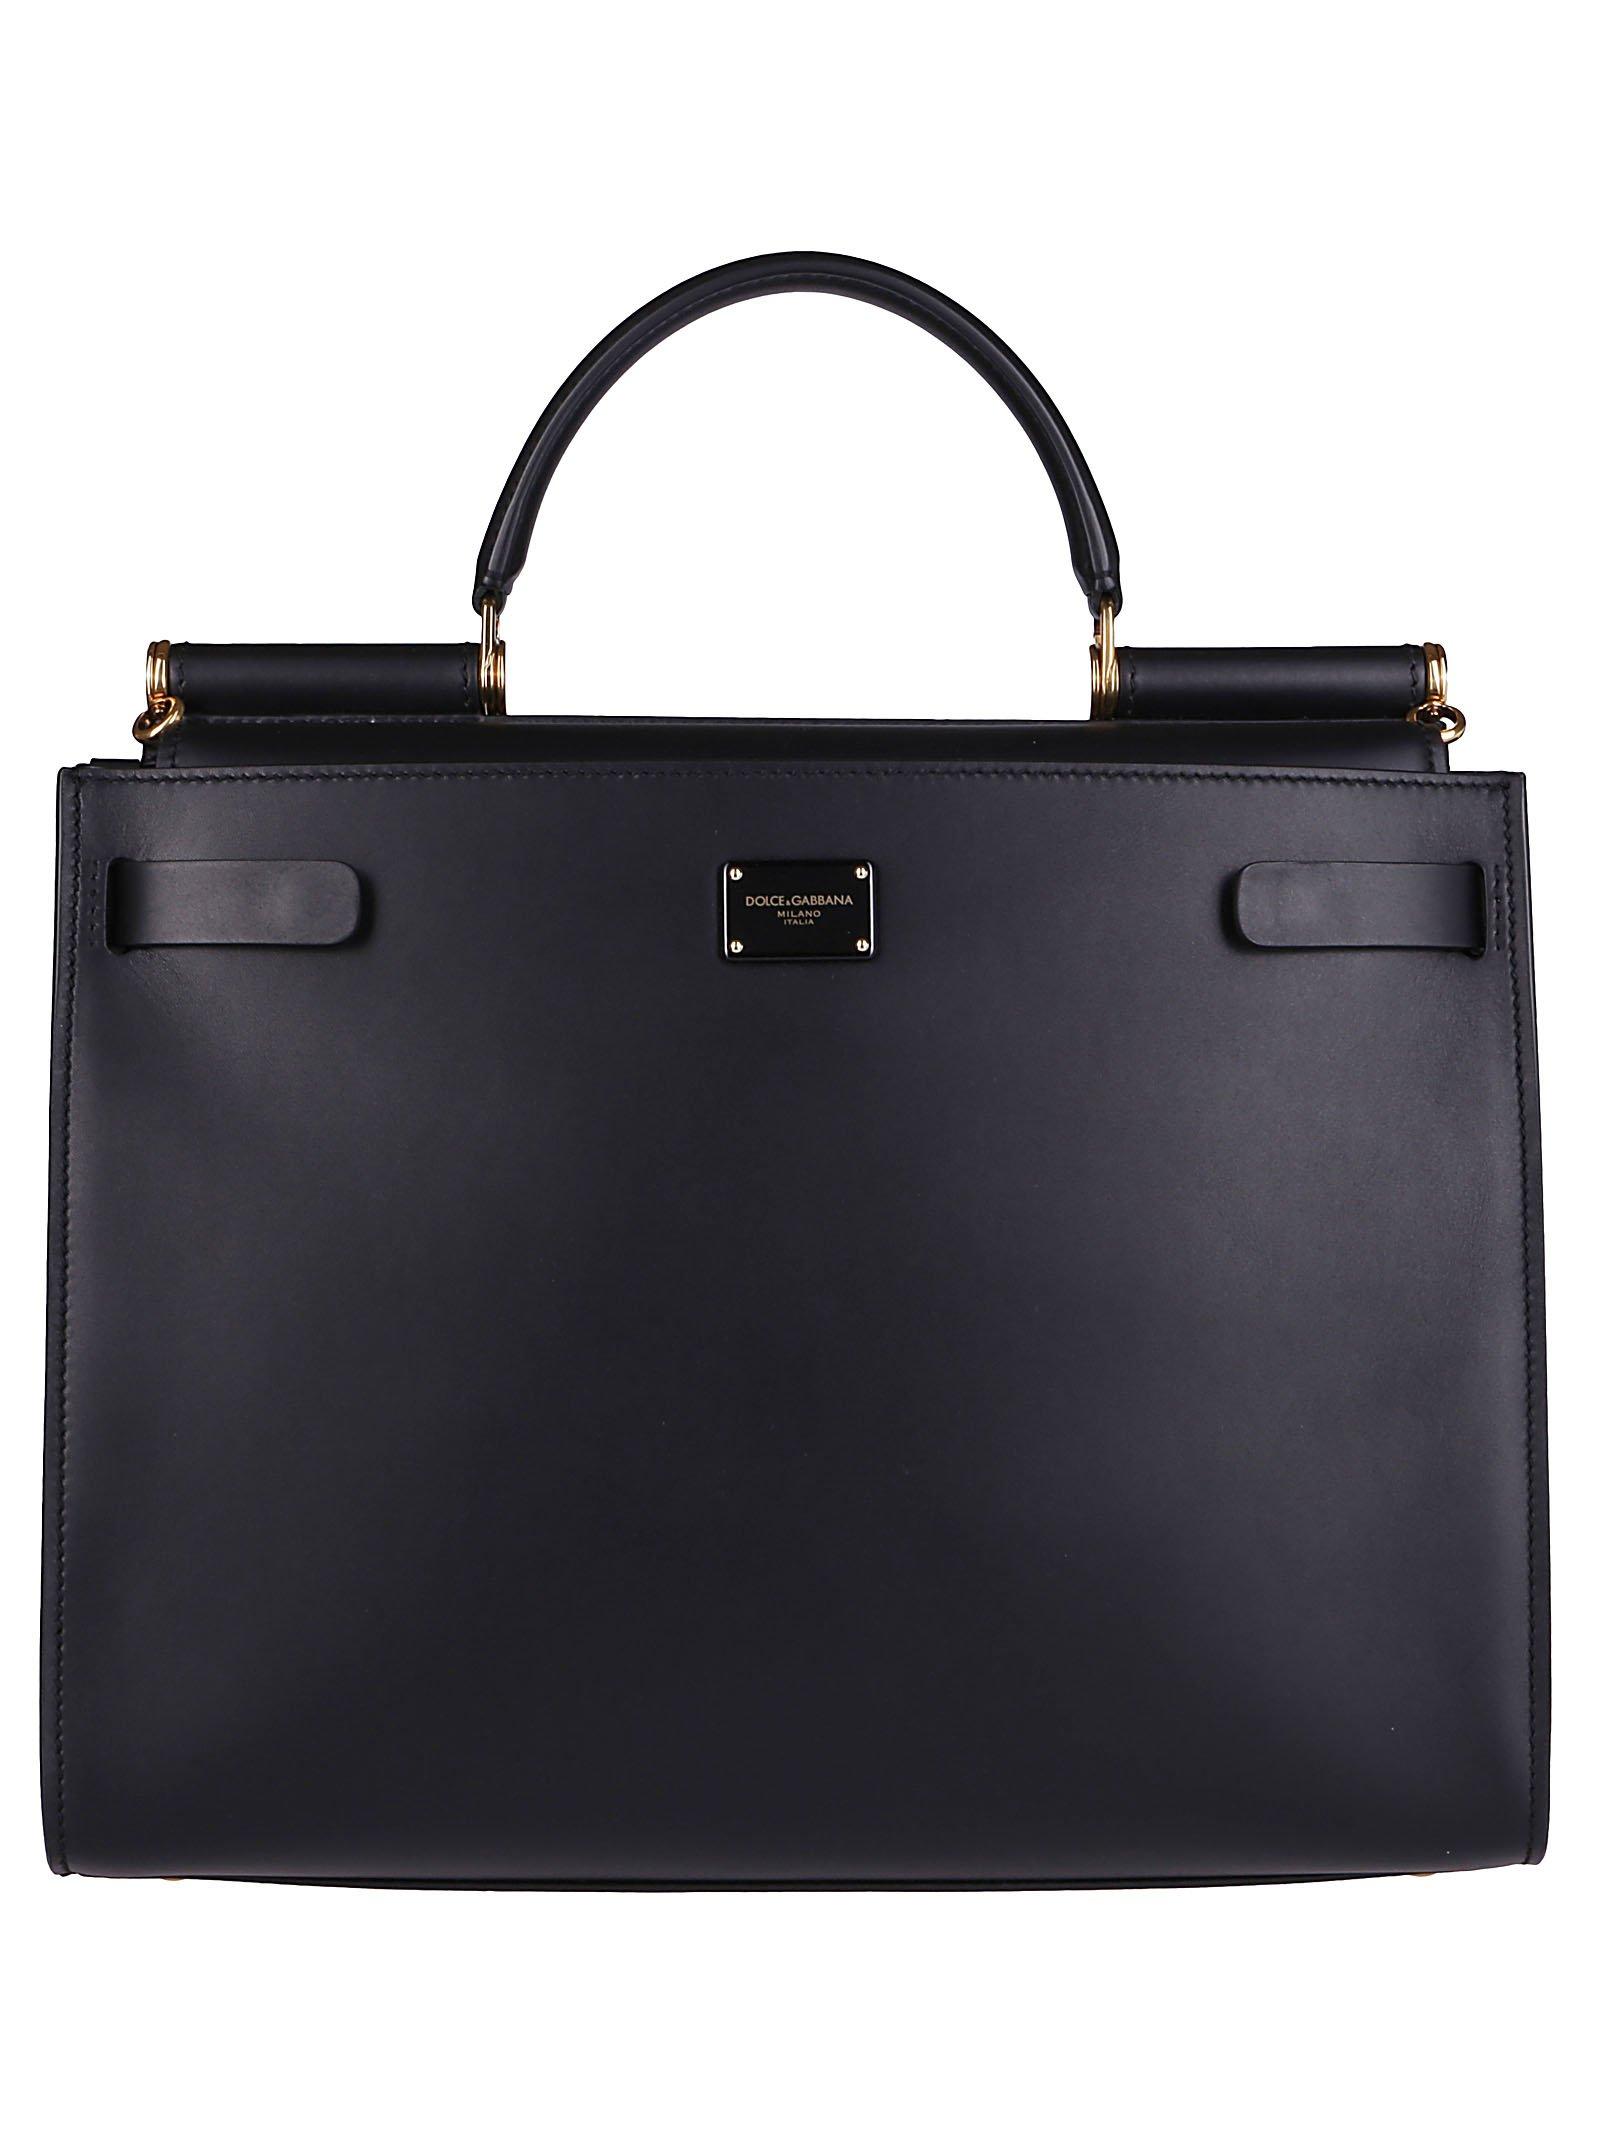 New Dolce & Gabbana Sicily 62 tote leather